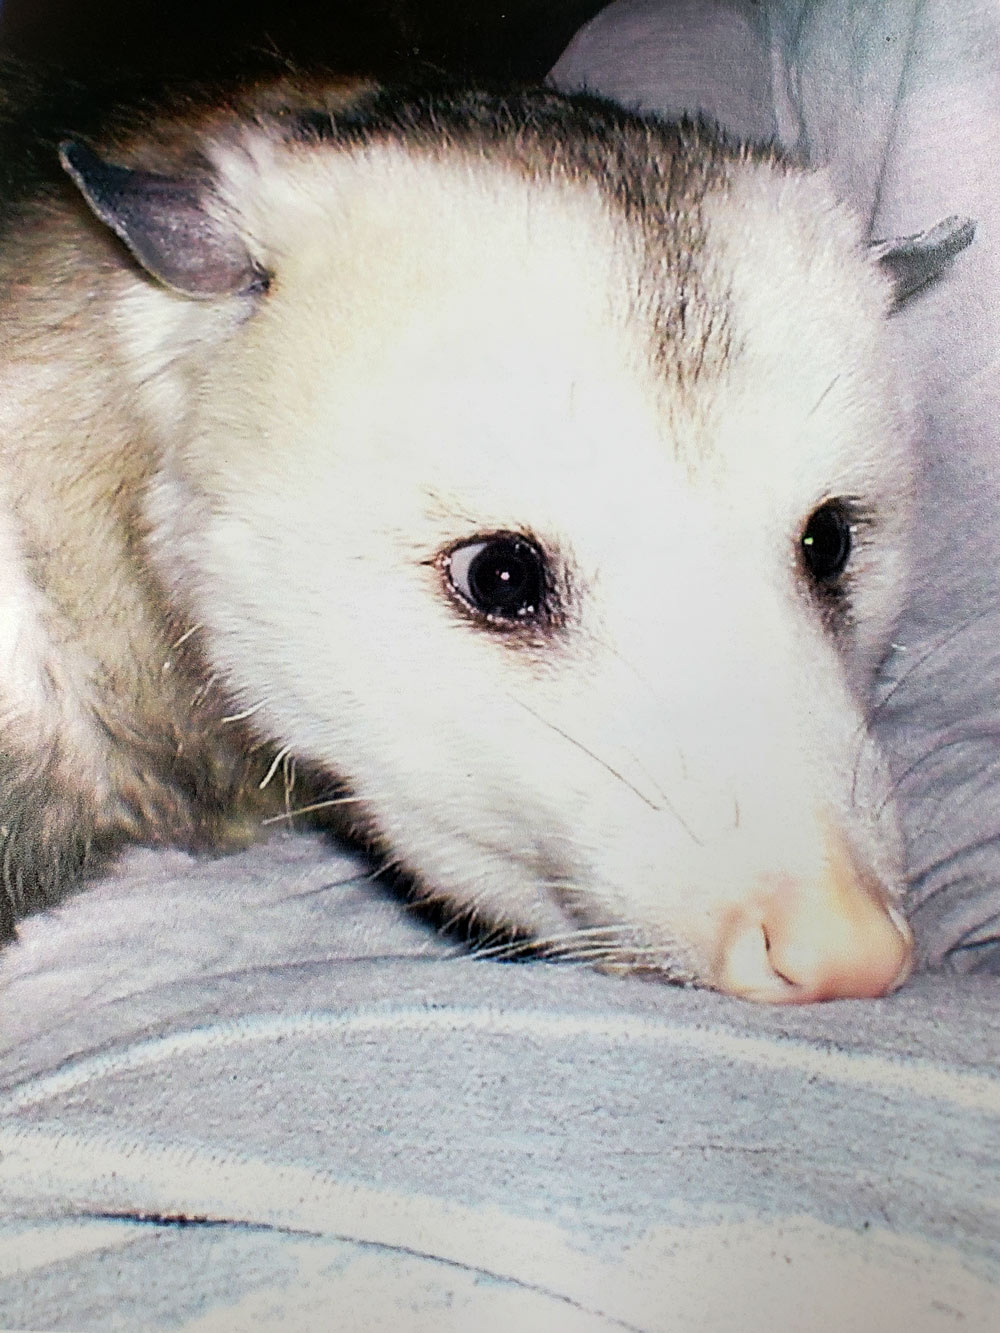 Grandma W. Sent a picture of Soupy, short for Marsupial. She'd raised him from a baby after the veterinarian advised Soupy couldn't survive on his own.